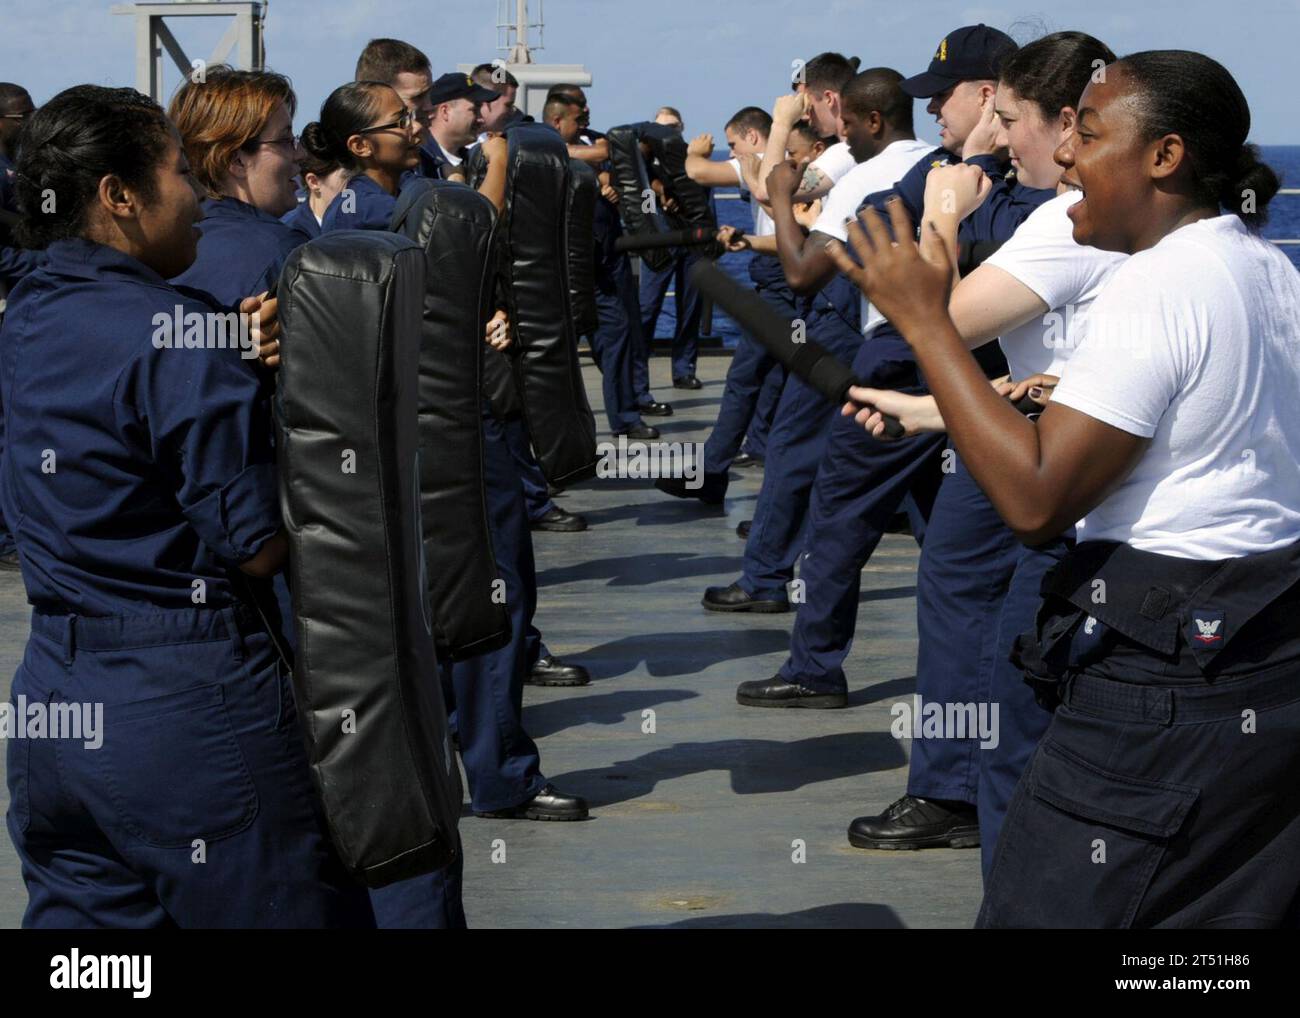 0910127478G-211 PACIFIC OCEAN (Oct. 12, 2009) Sailors participate in a reactionary force non-lethal weapons class aboard the amphibious command ship USS Blue Ridge (LCC 19). Navy Stock Photo